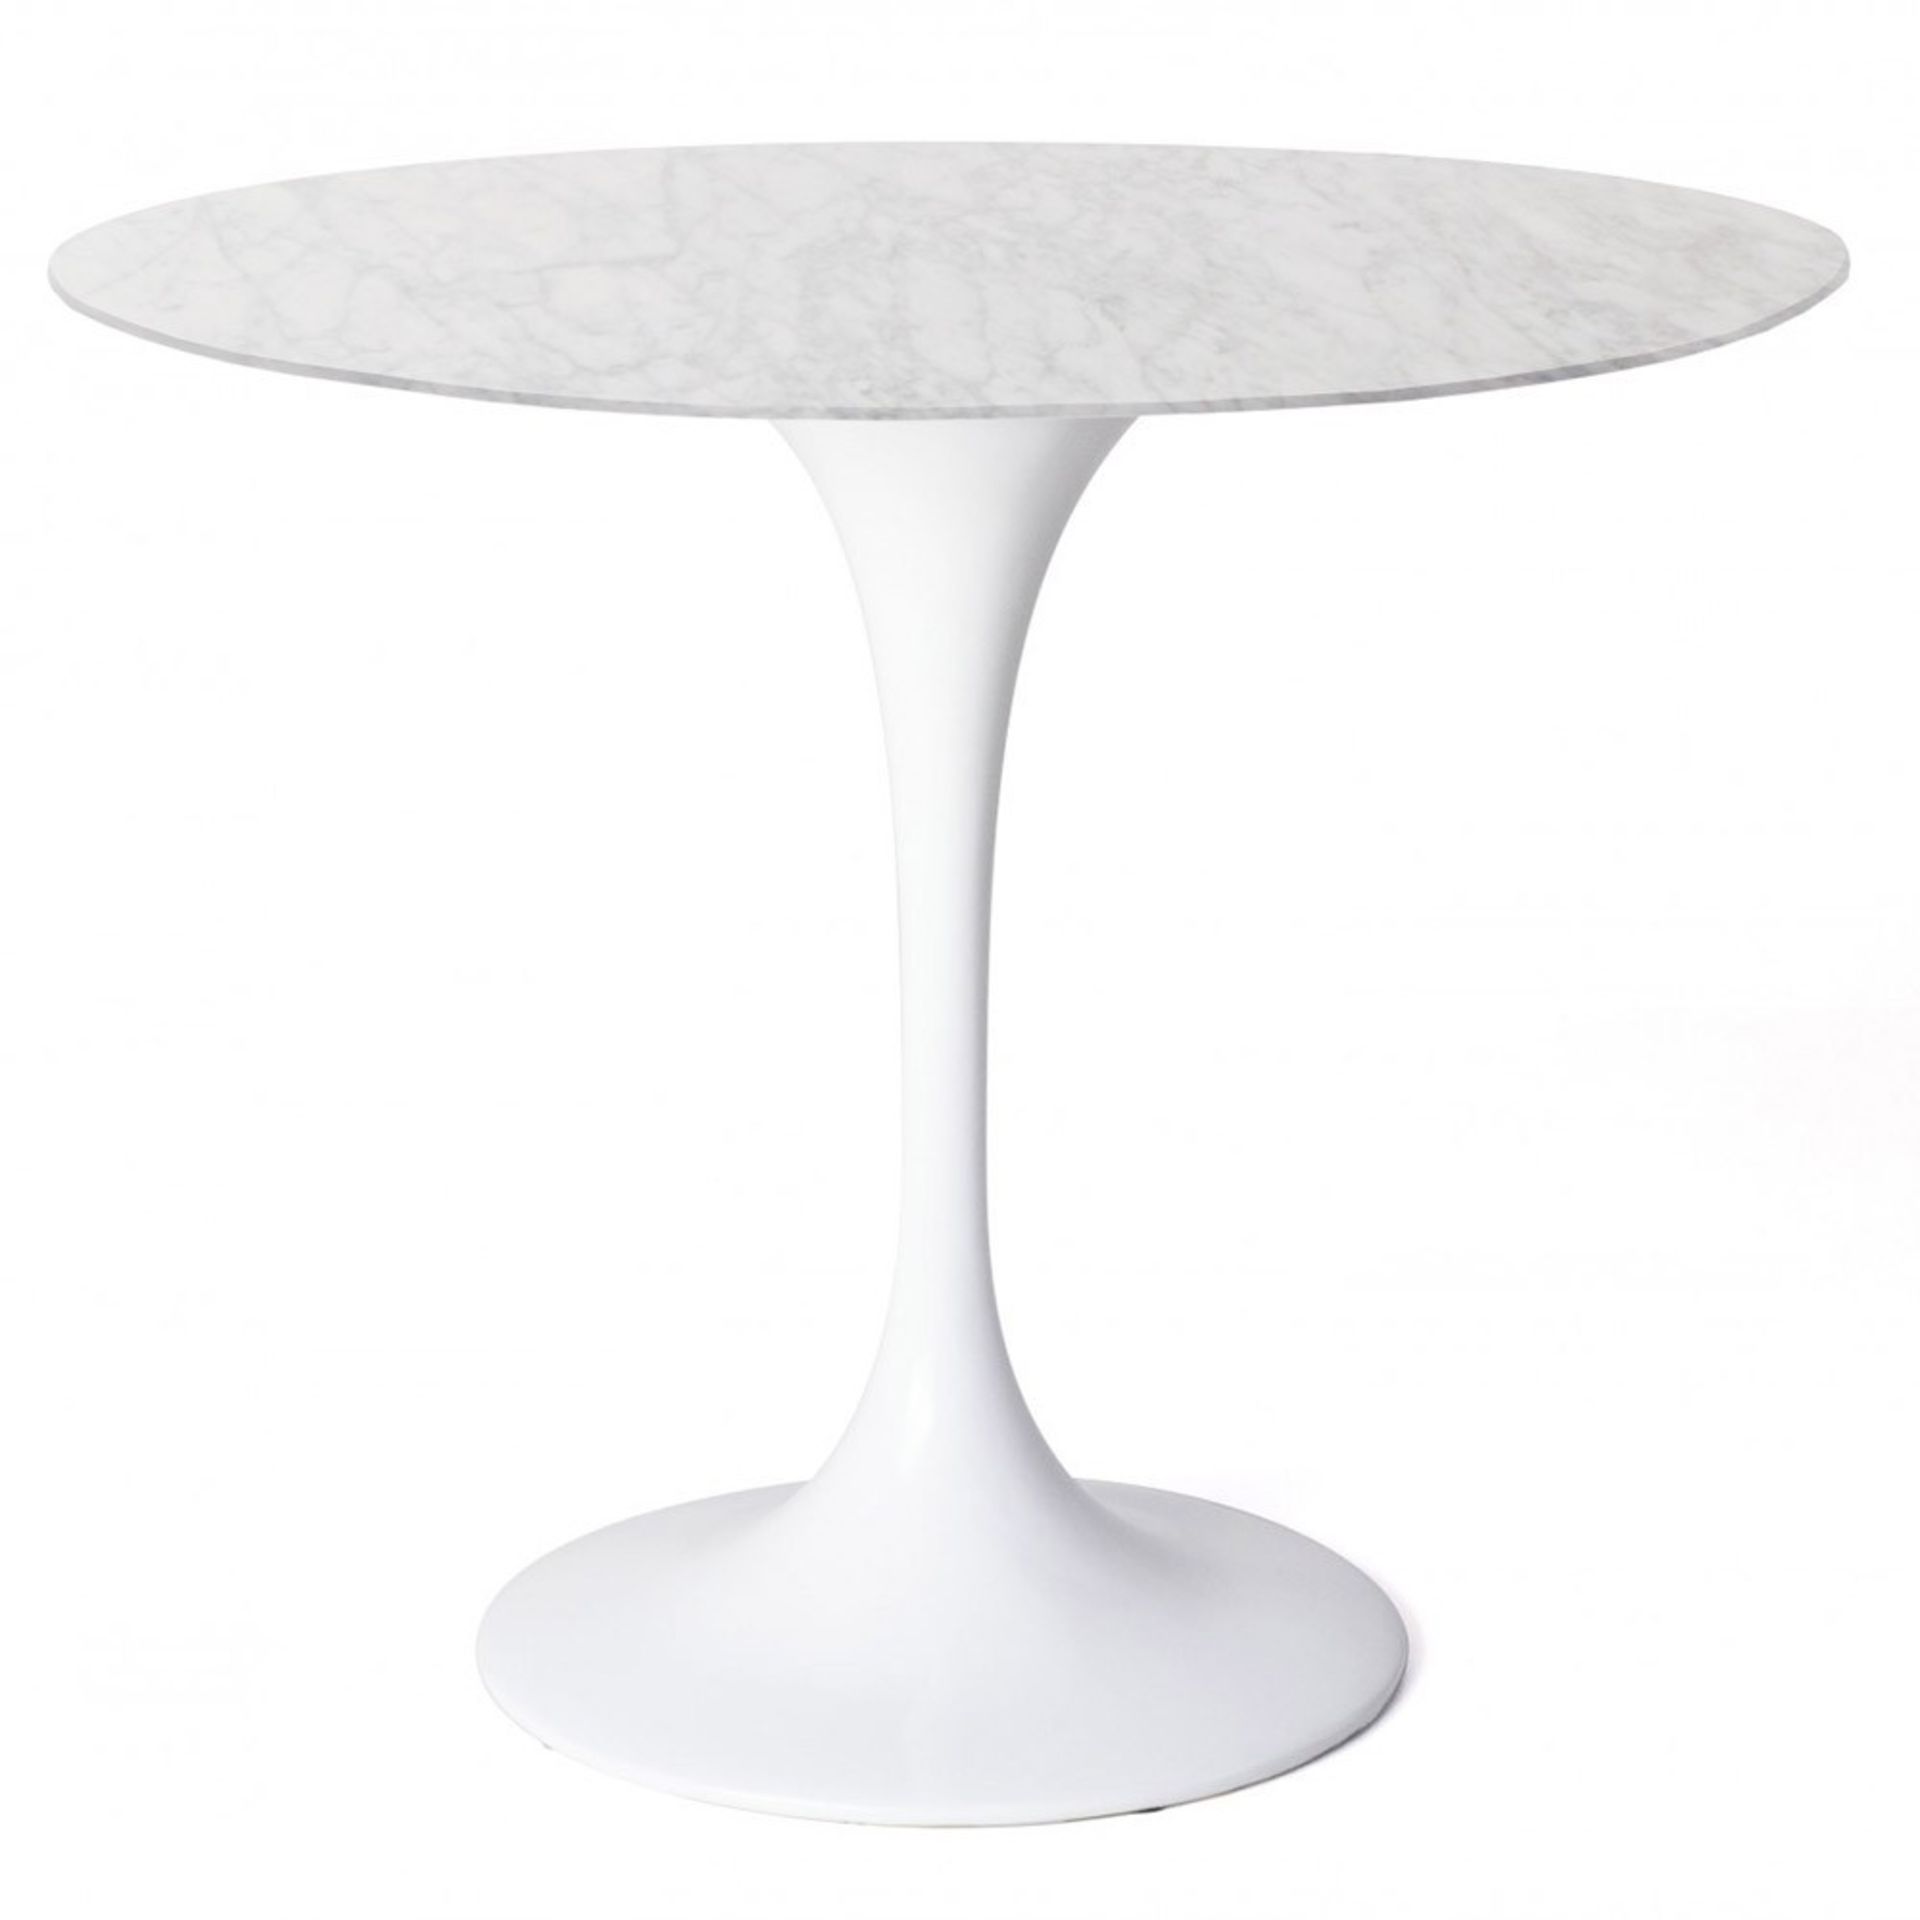 Boxed/As New - Round Stem Table in White with Black Marble Top (2 Boxes Model TS-B012M). Size (H)